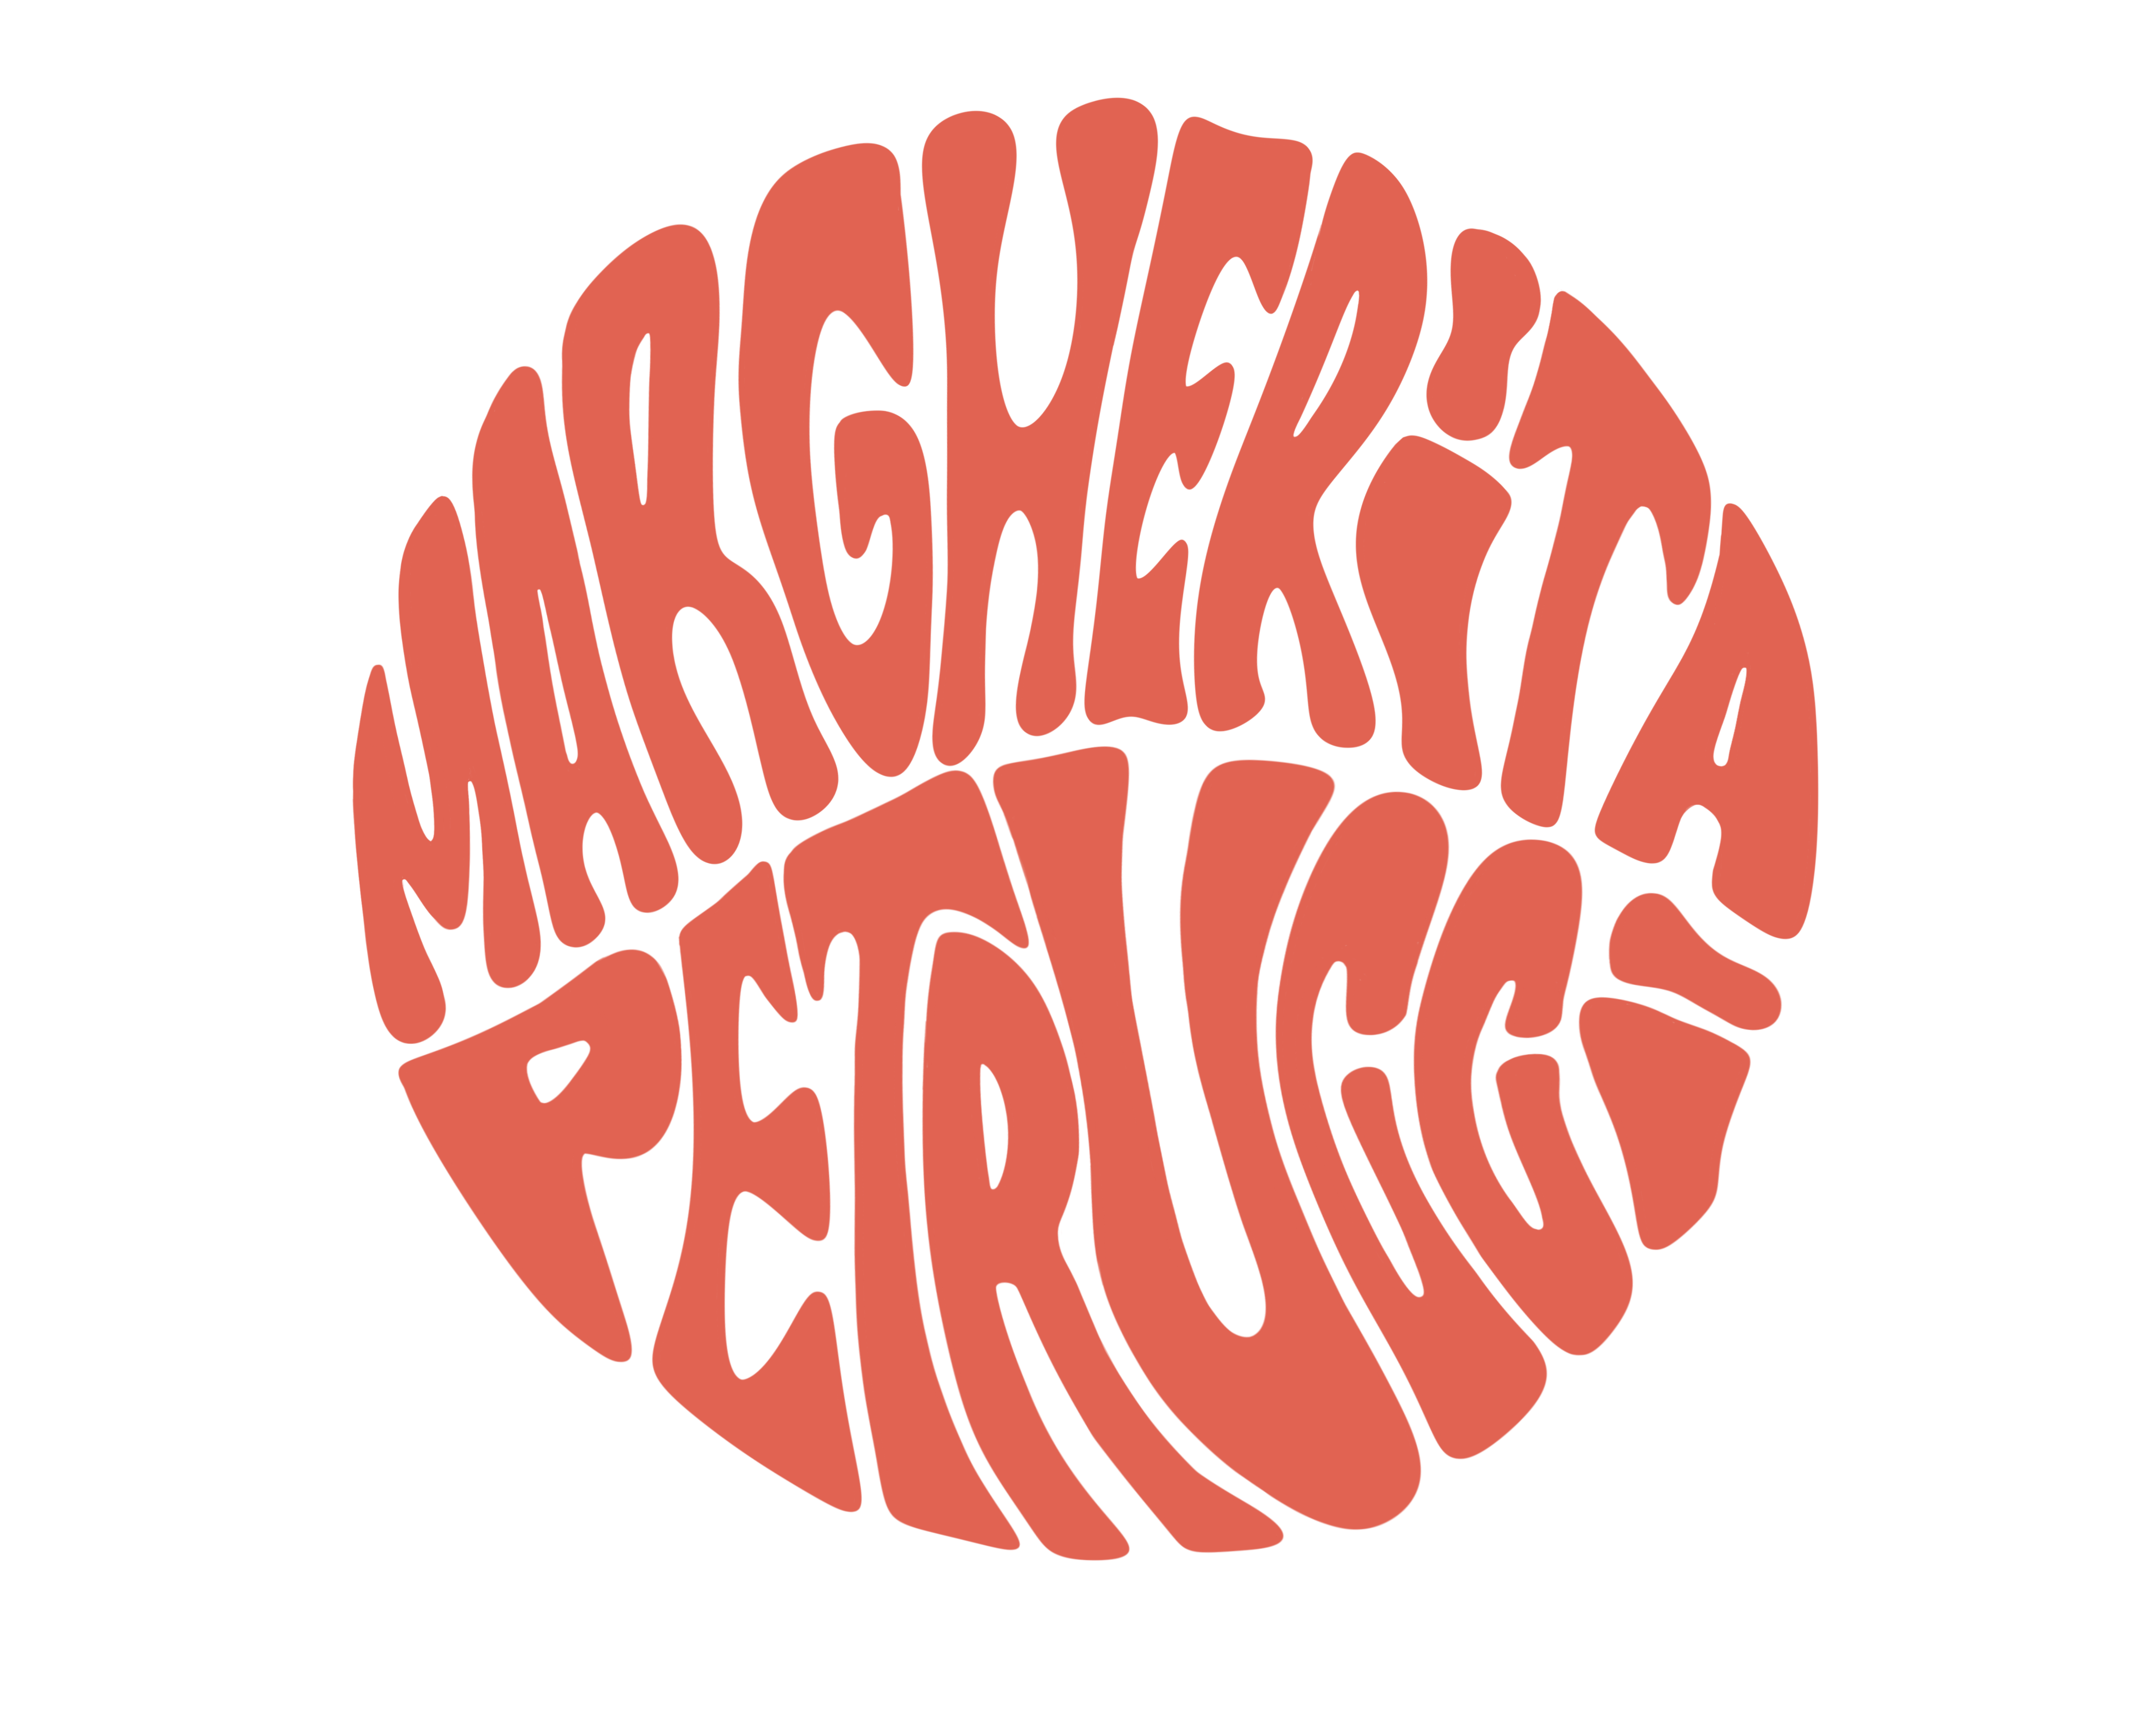 The text "Margherita Petrucci" in funky orange writing in a circle.